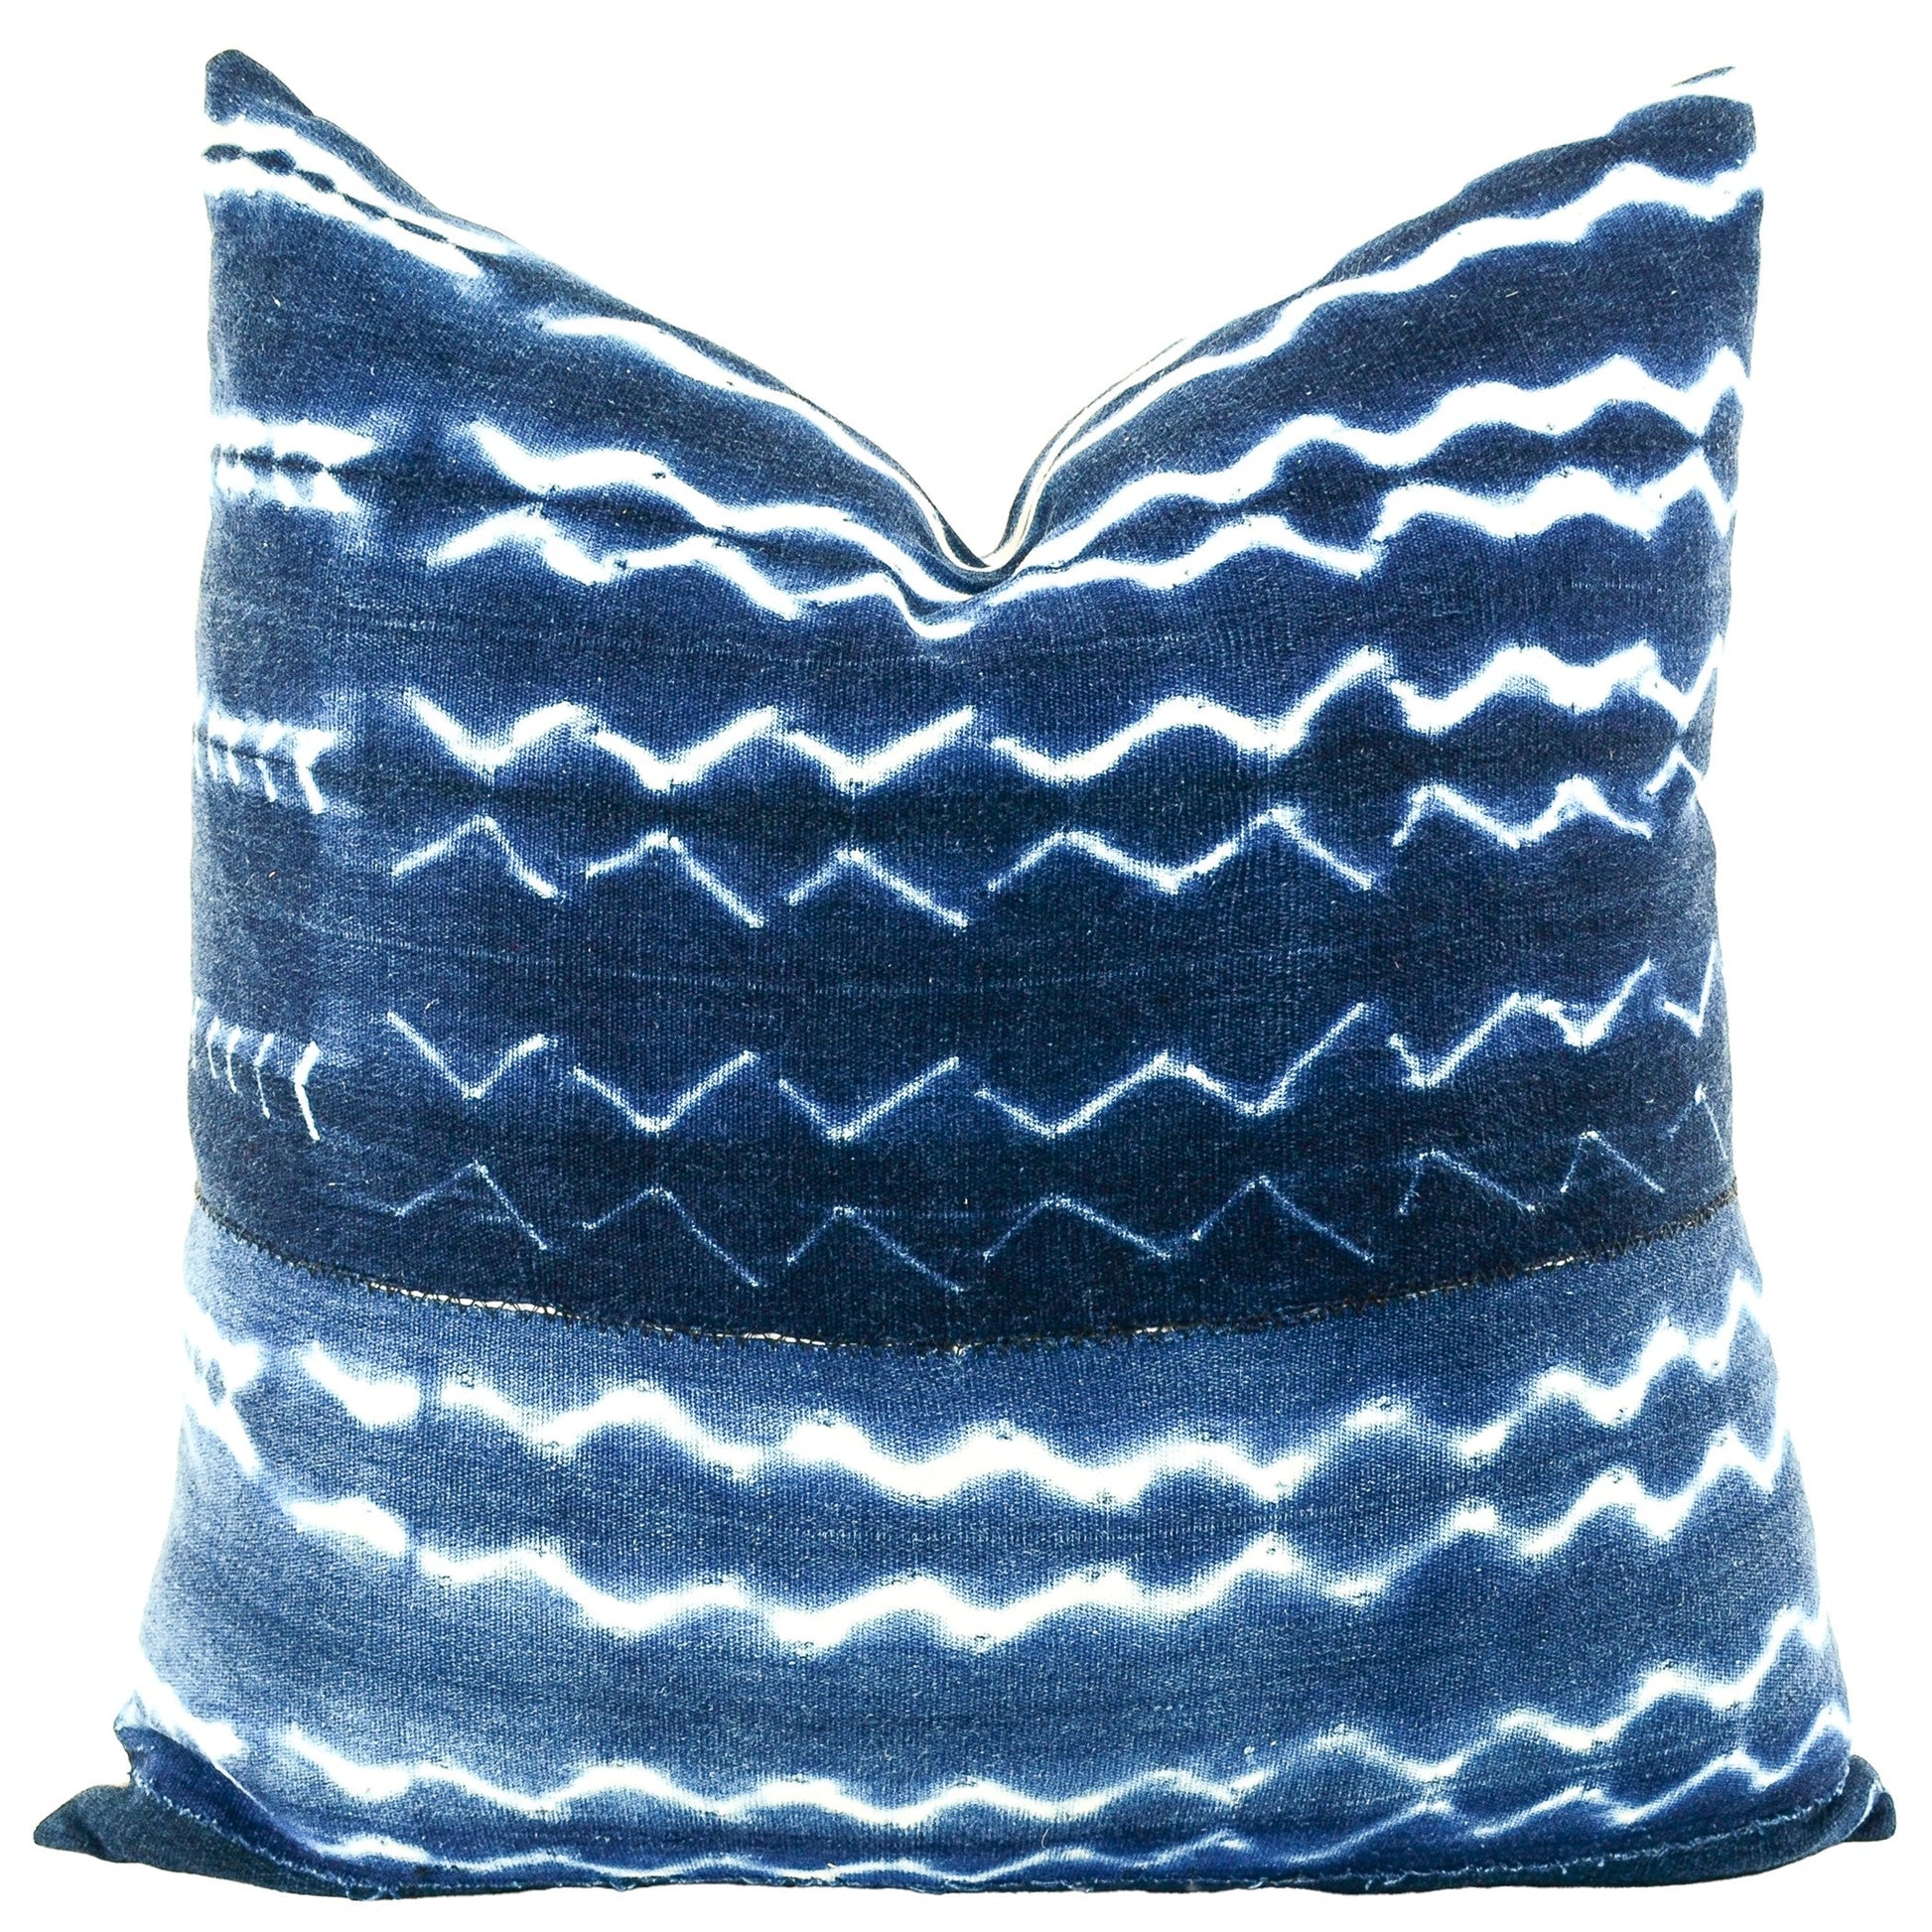 Front of pillow with rich blue and white patterns made from vintage handwoven indigo cotton cloth from Mali West Africa